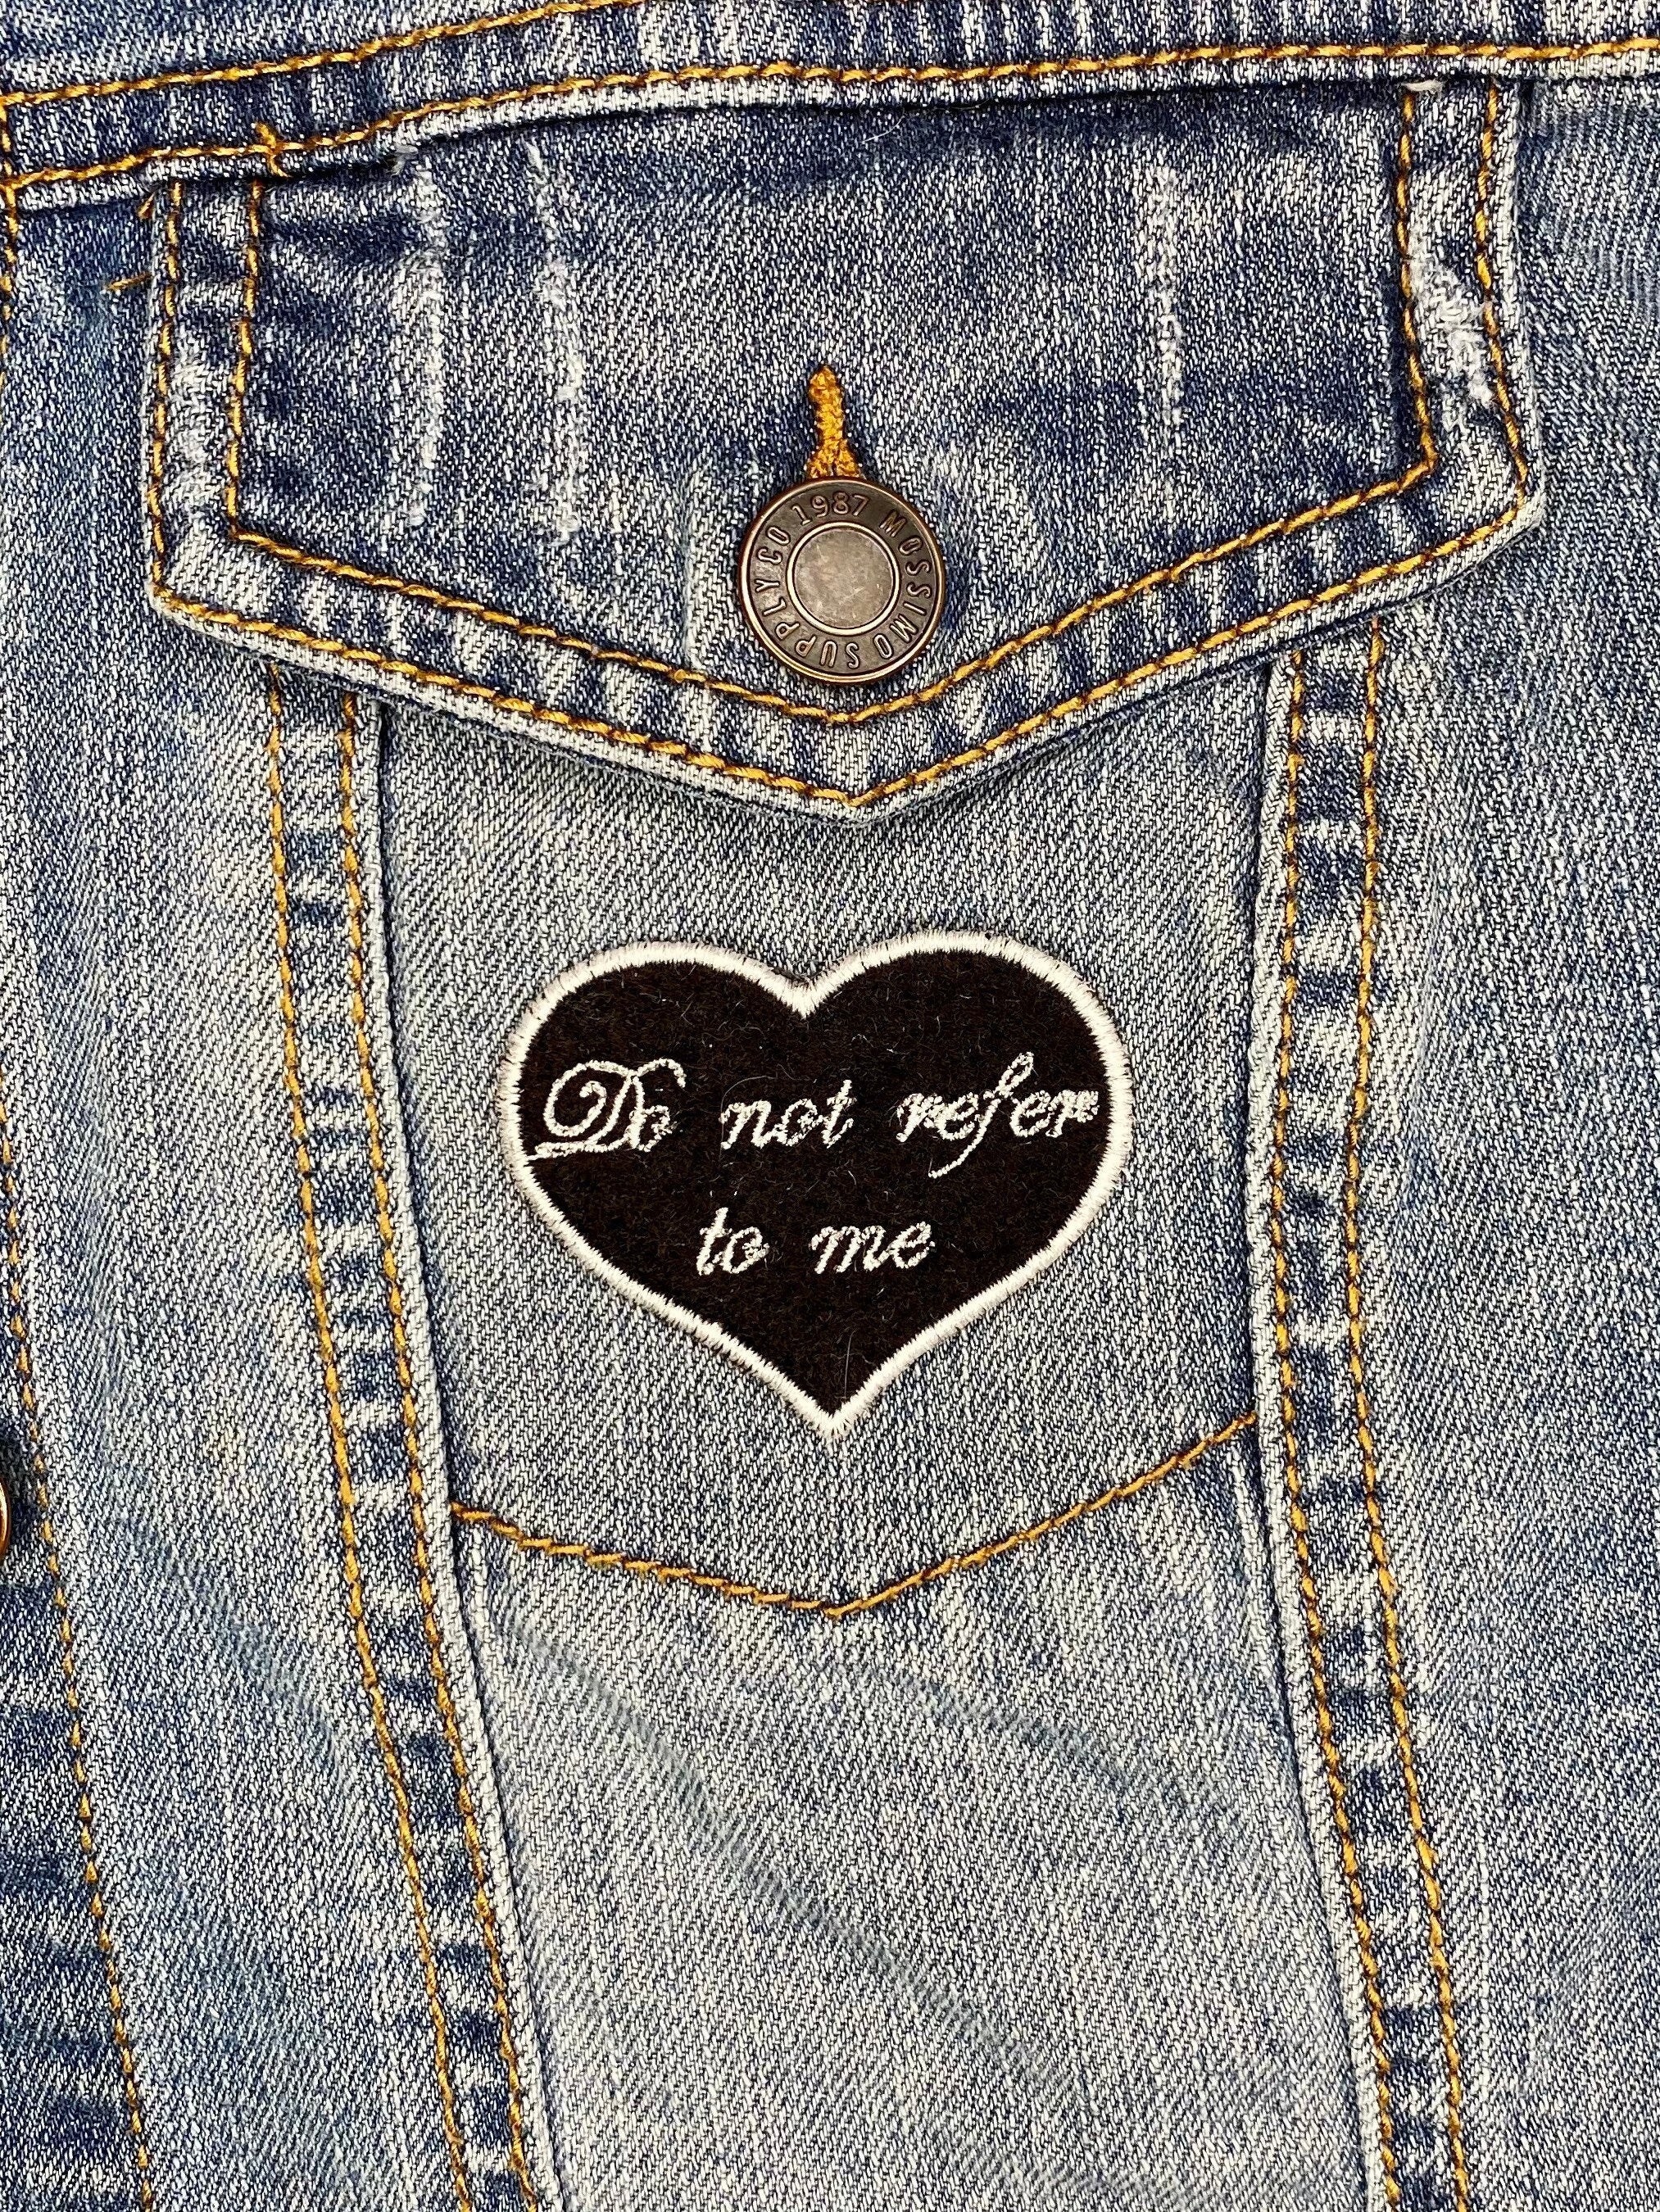 Do Not Refer To Me Pronoun Embroidered Iron-on Patch - IncredibleGood Inc